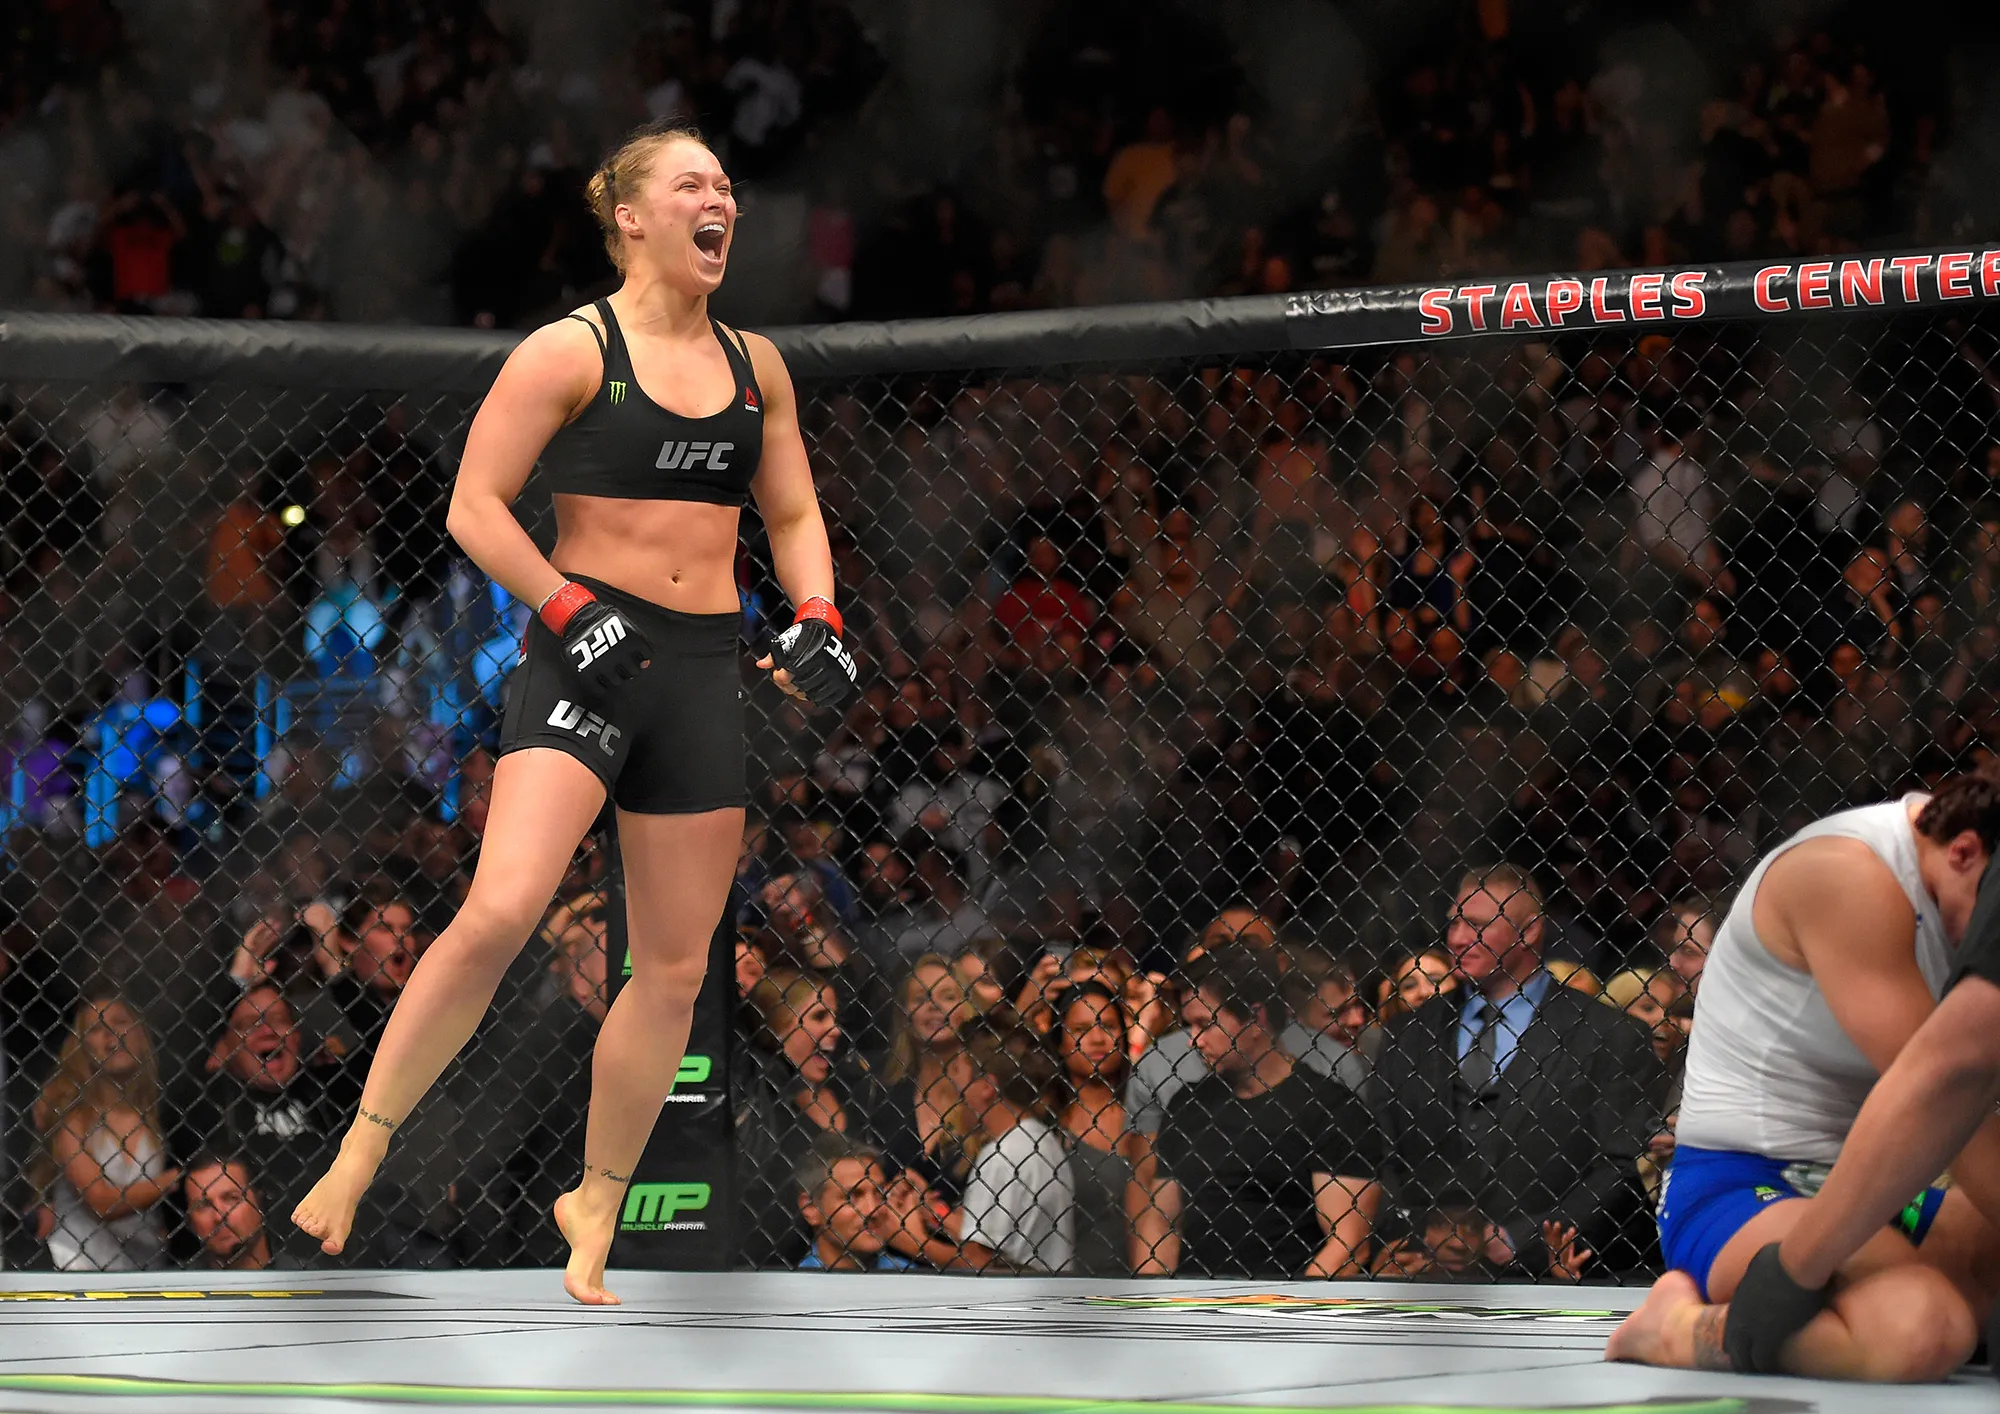 Ronda Rousey’s $13.7 Million UFC Earnings Outshines Brock Lesnar by Almost Double